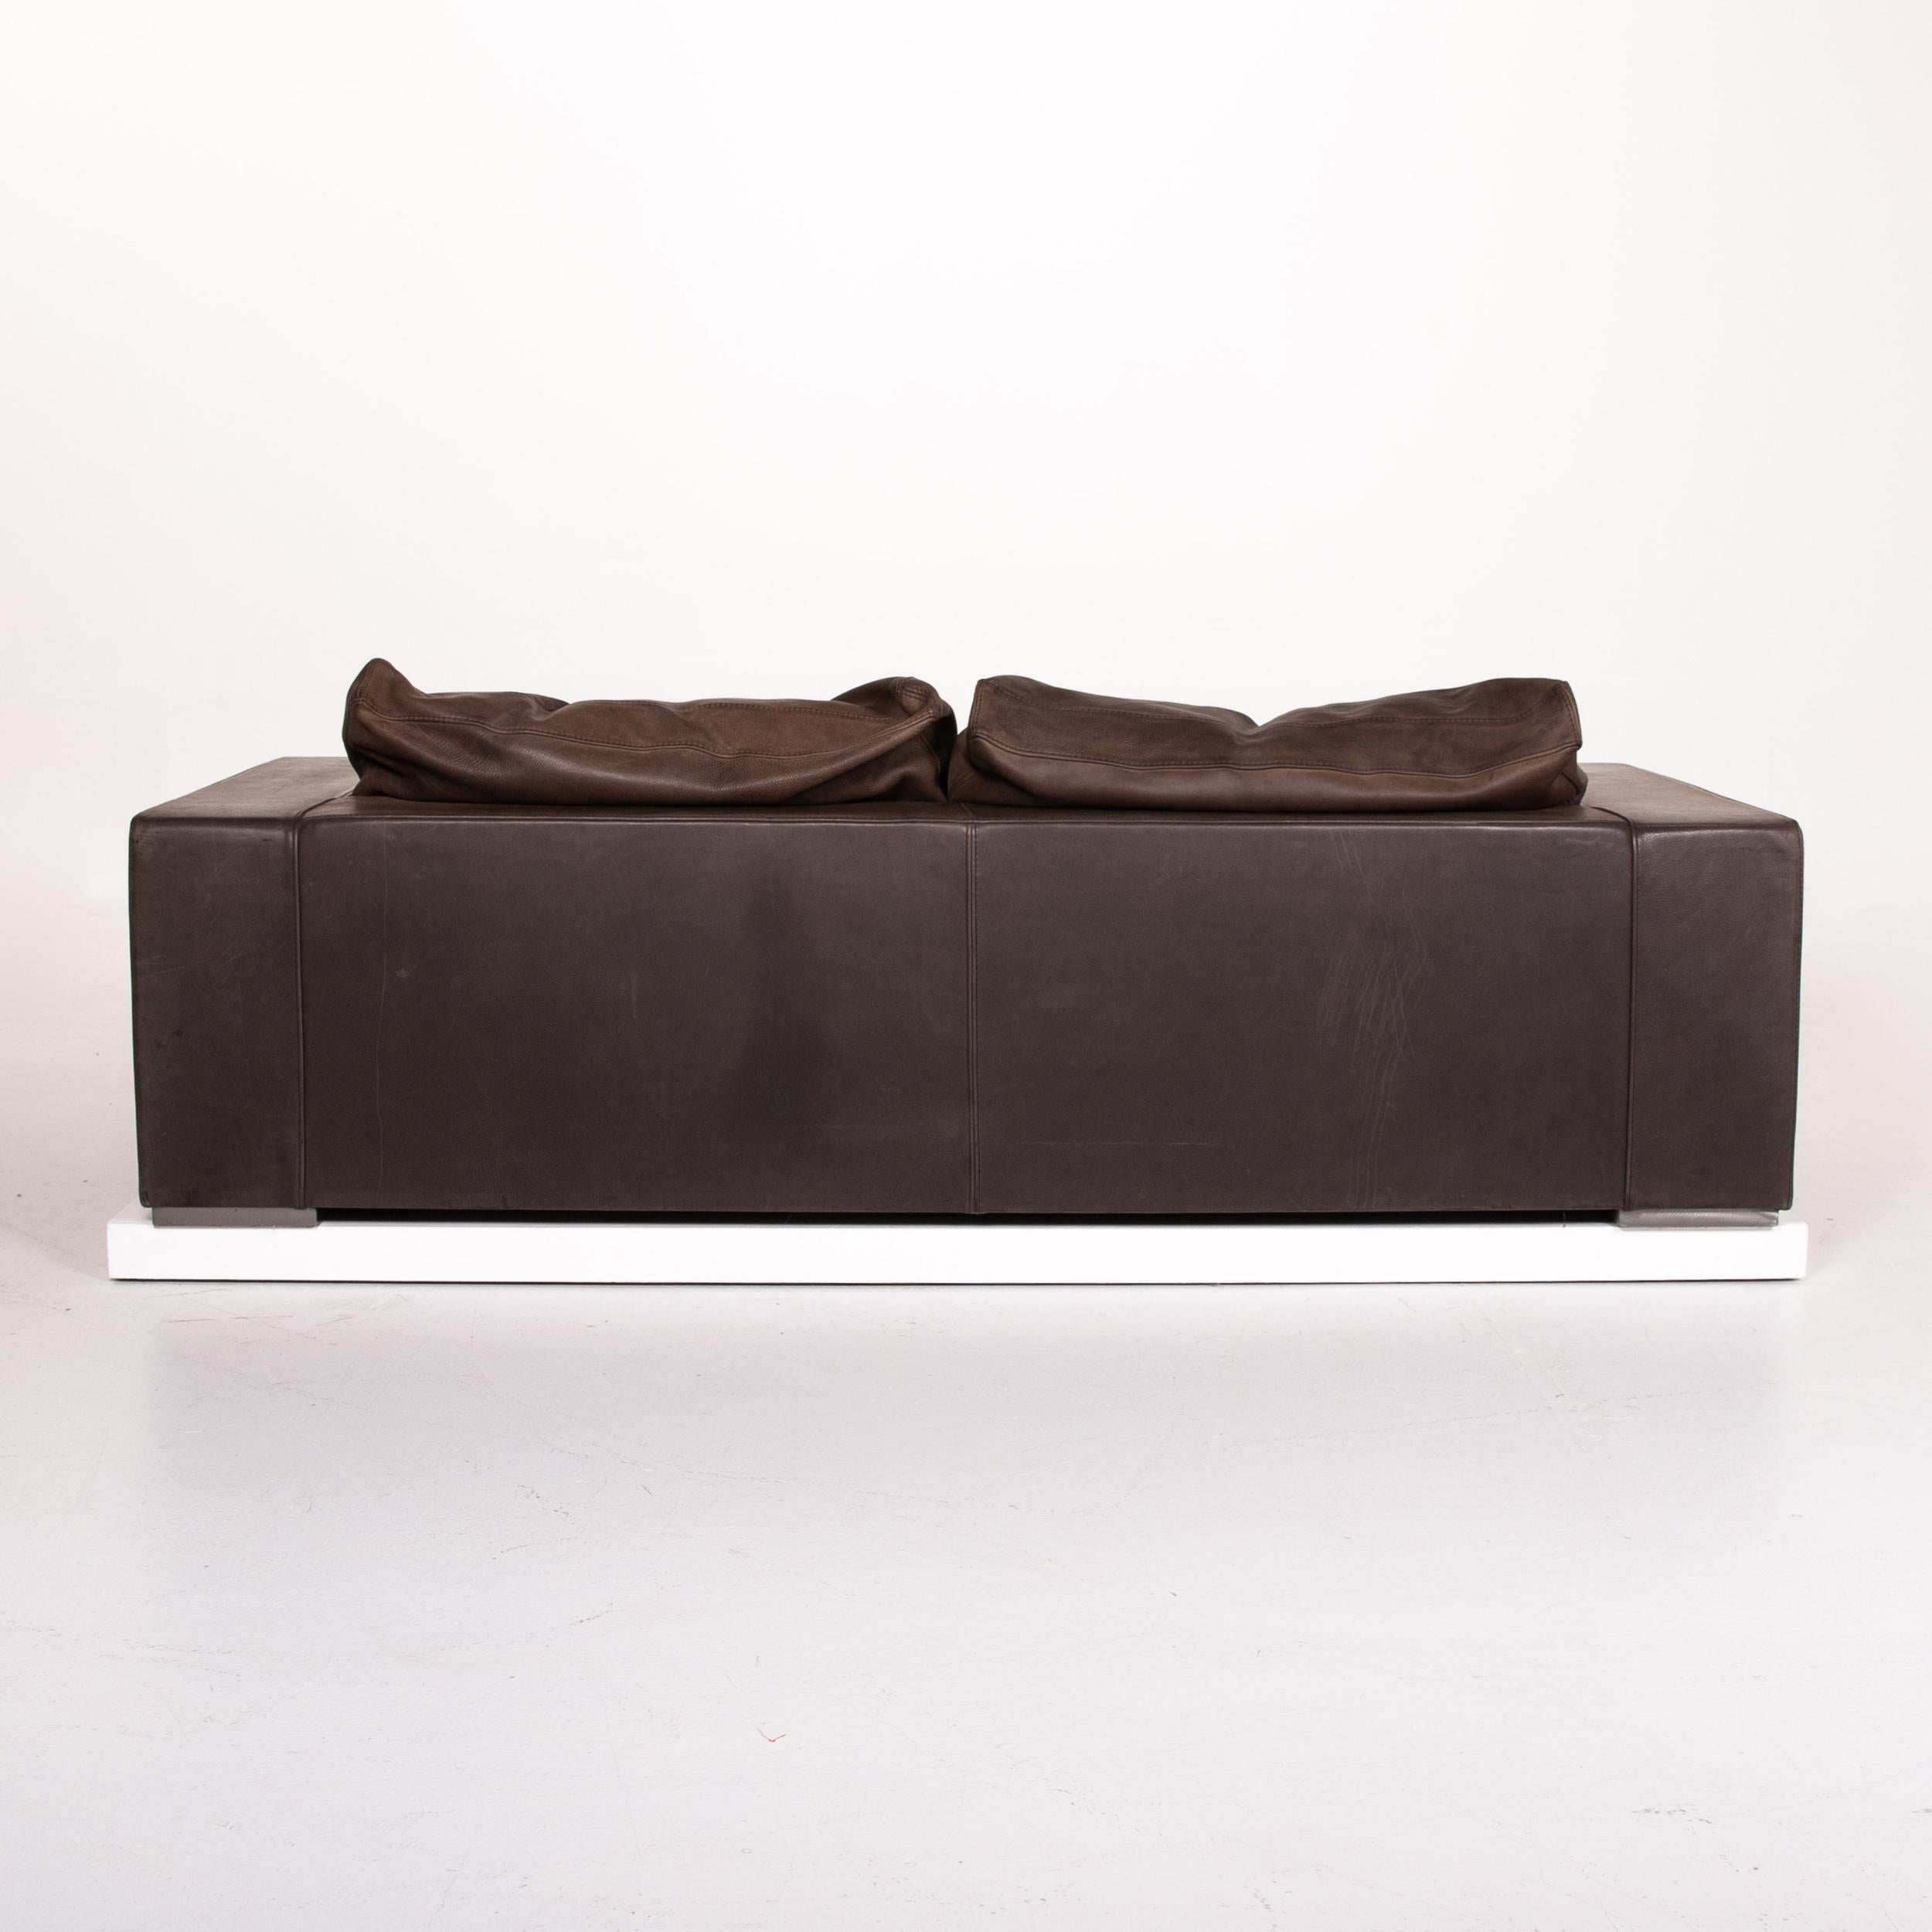 Baxter Budapest Leather Sofa Brown Two-Seat Couch 14016 For Sale 3